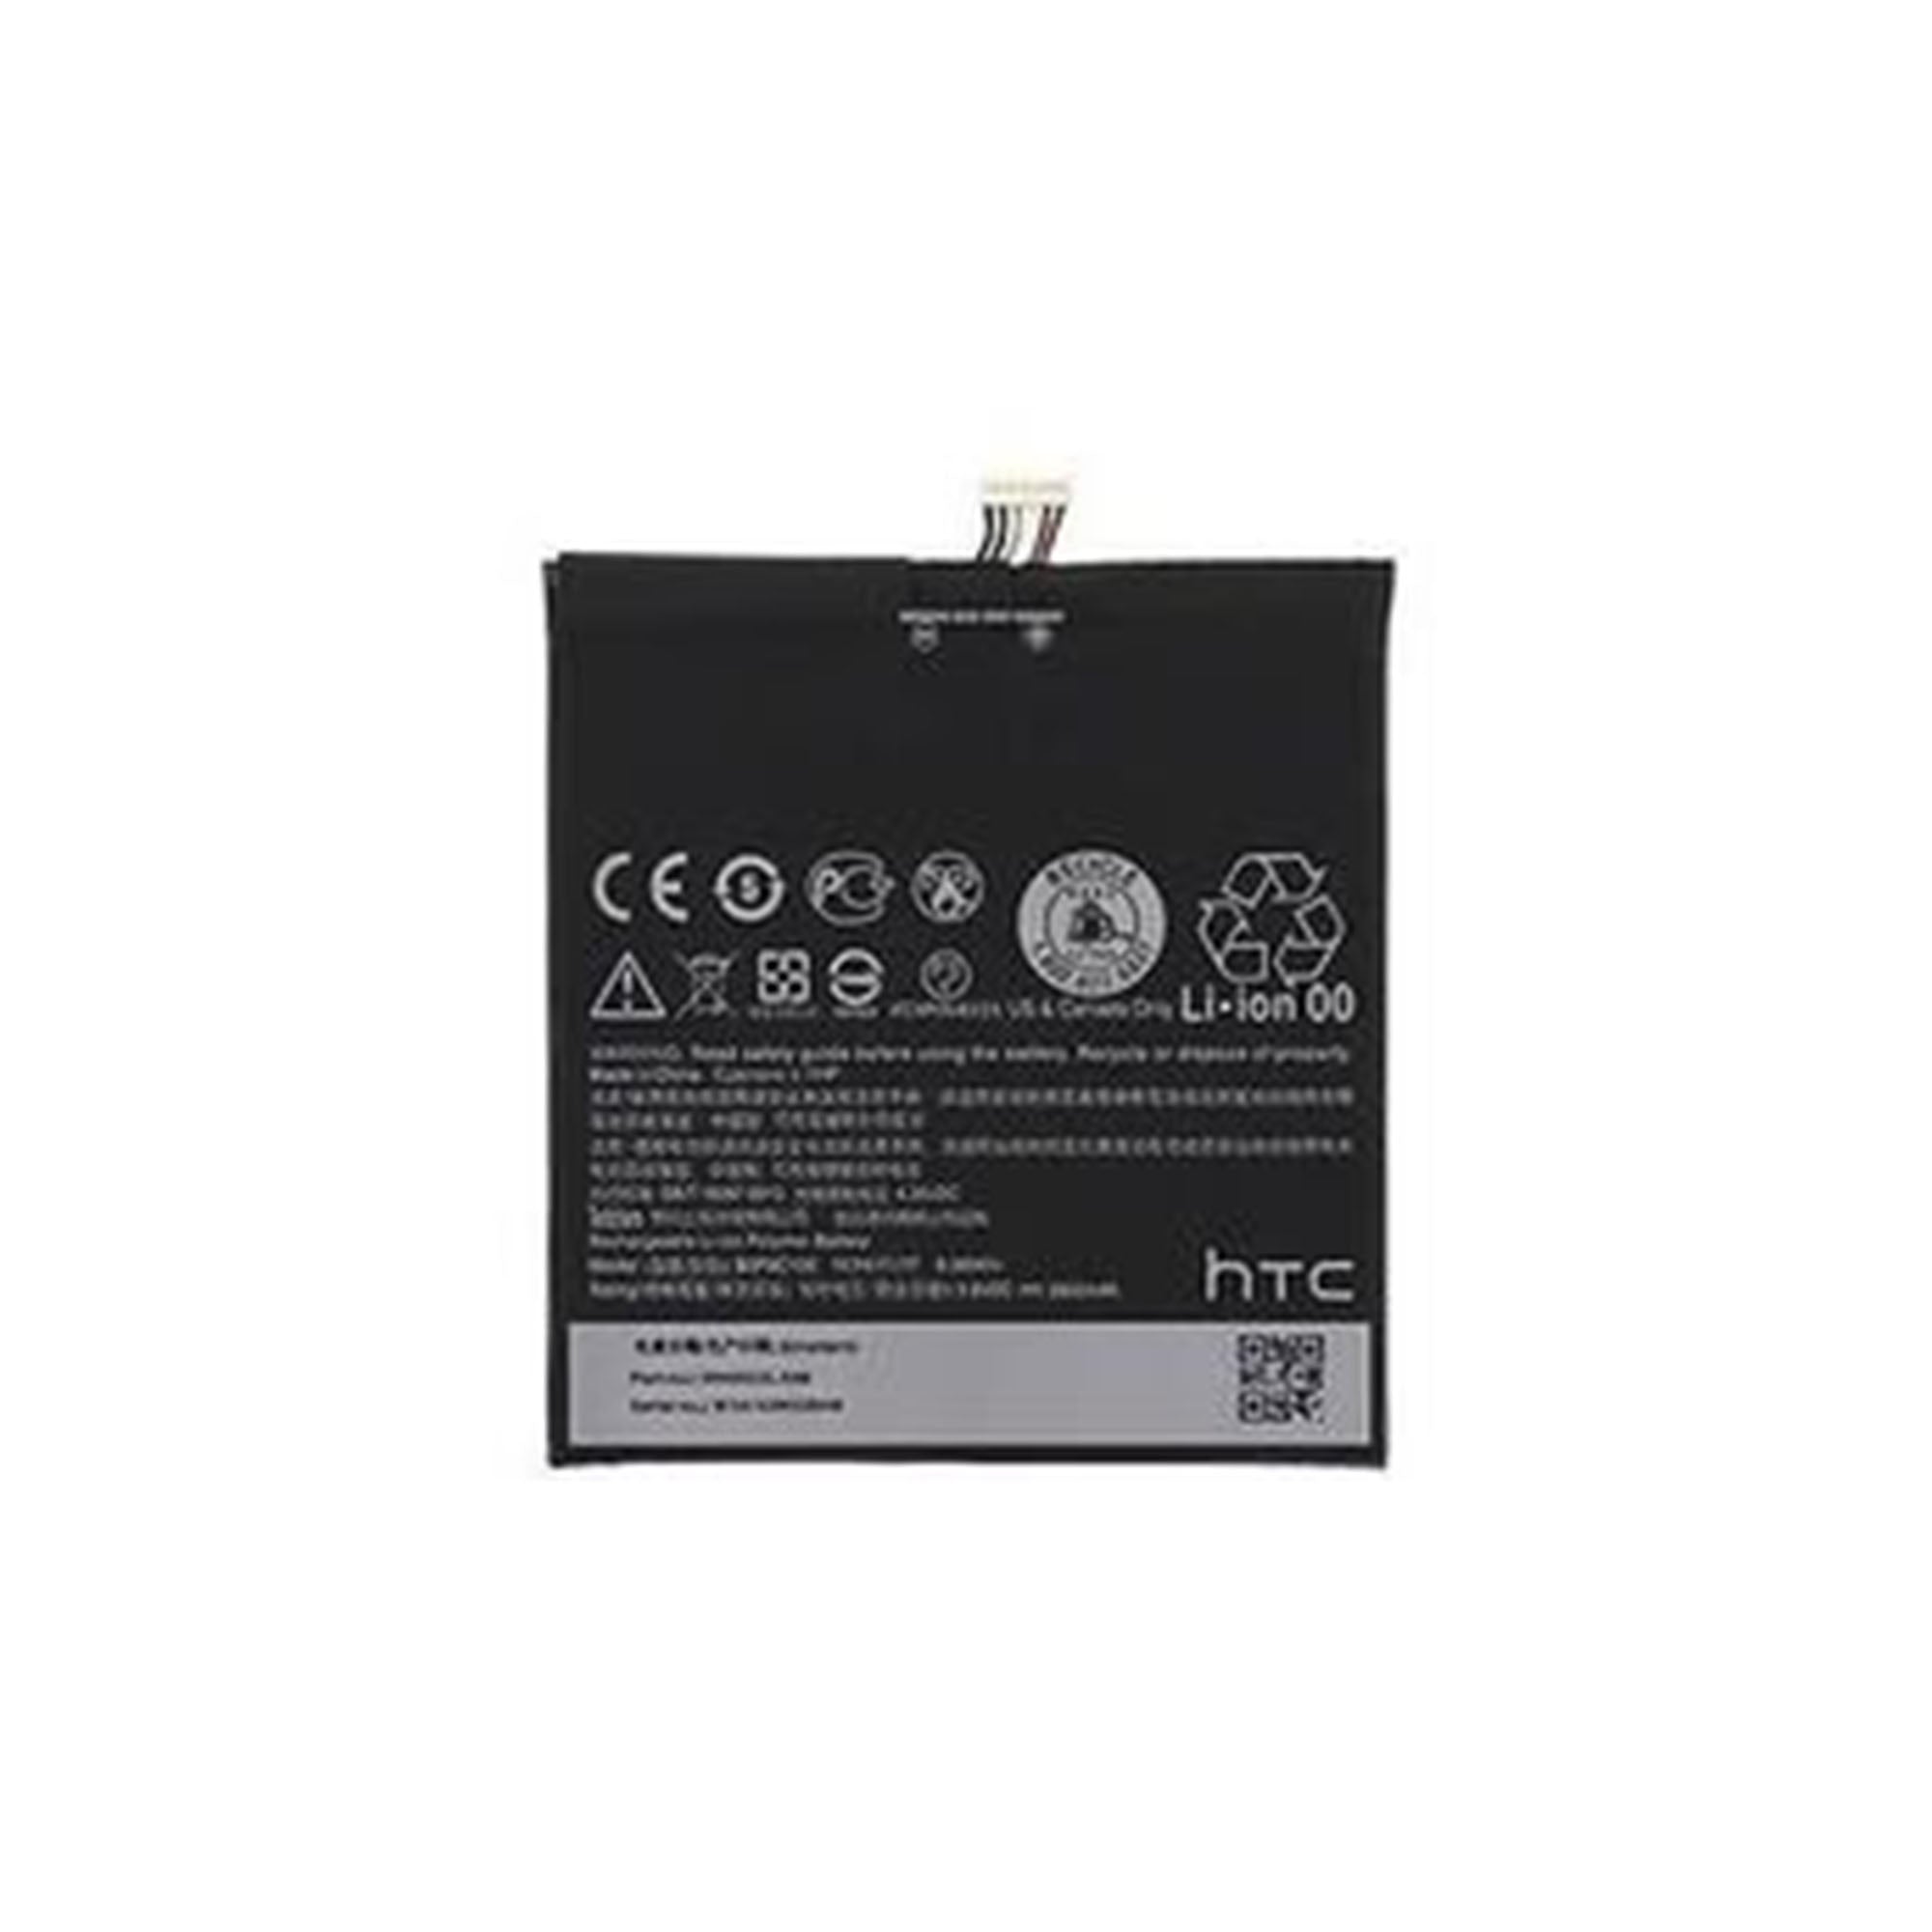 MOBILE BATTERY FOR HTC 816